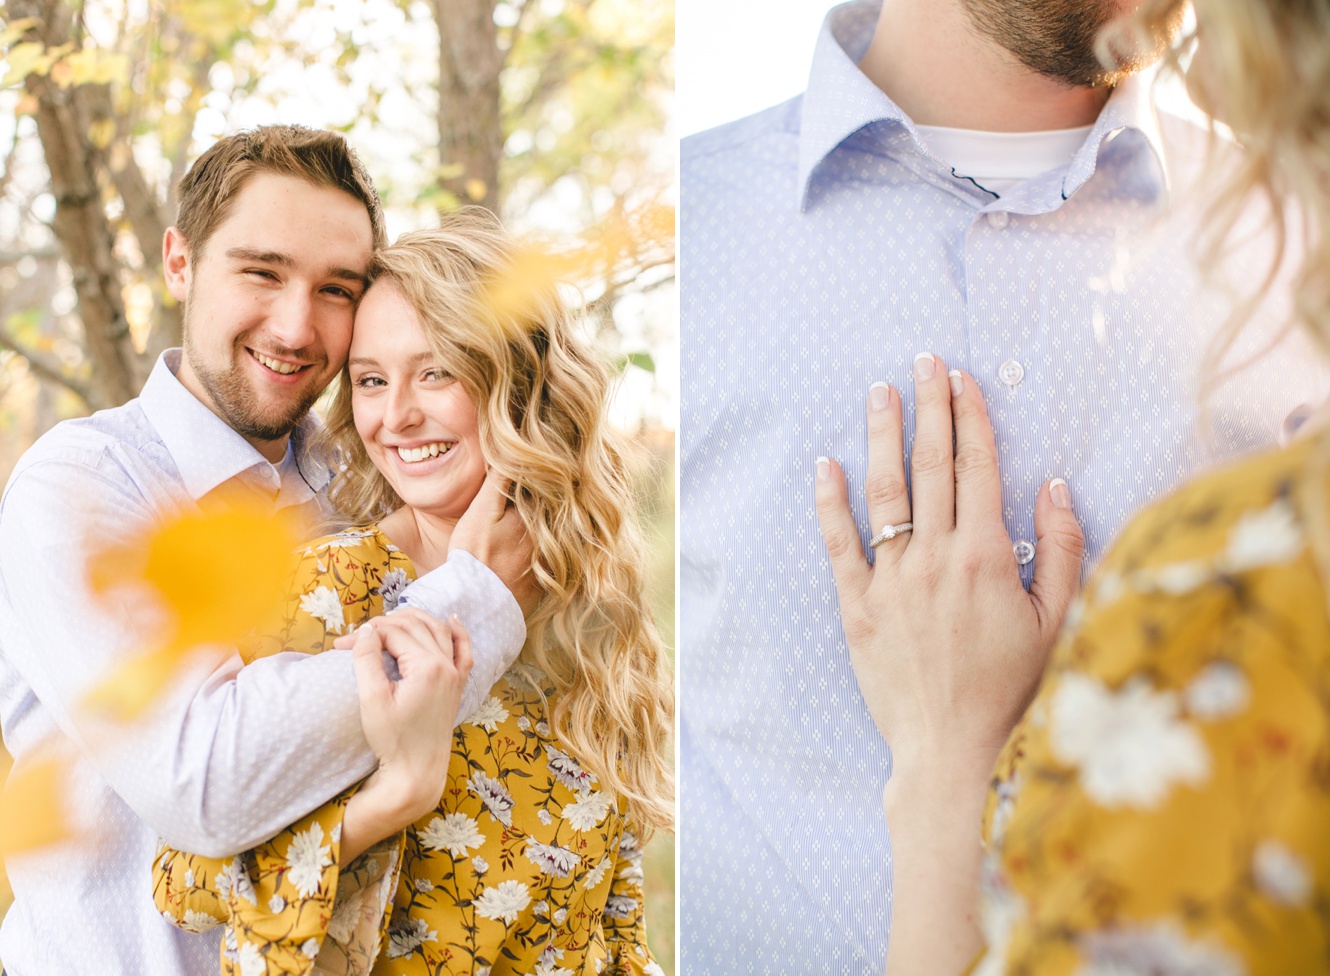 What to wear for your engagement session photo